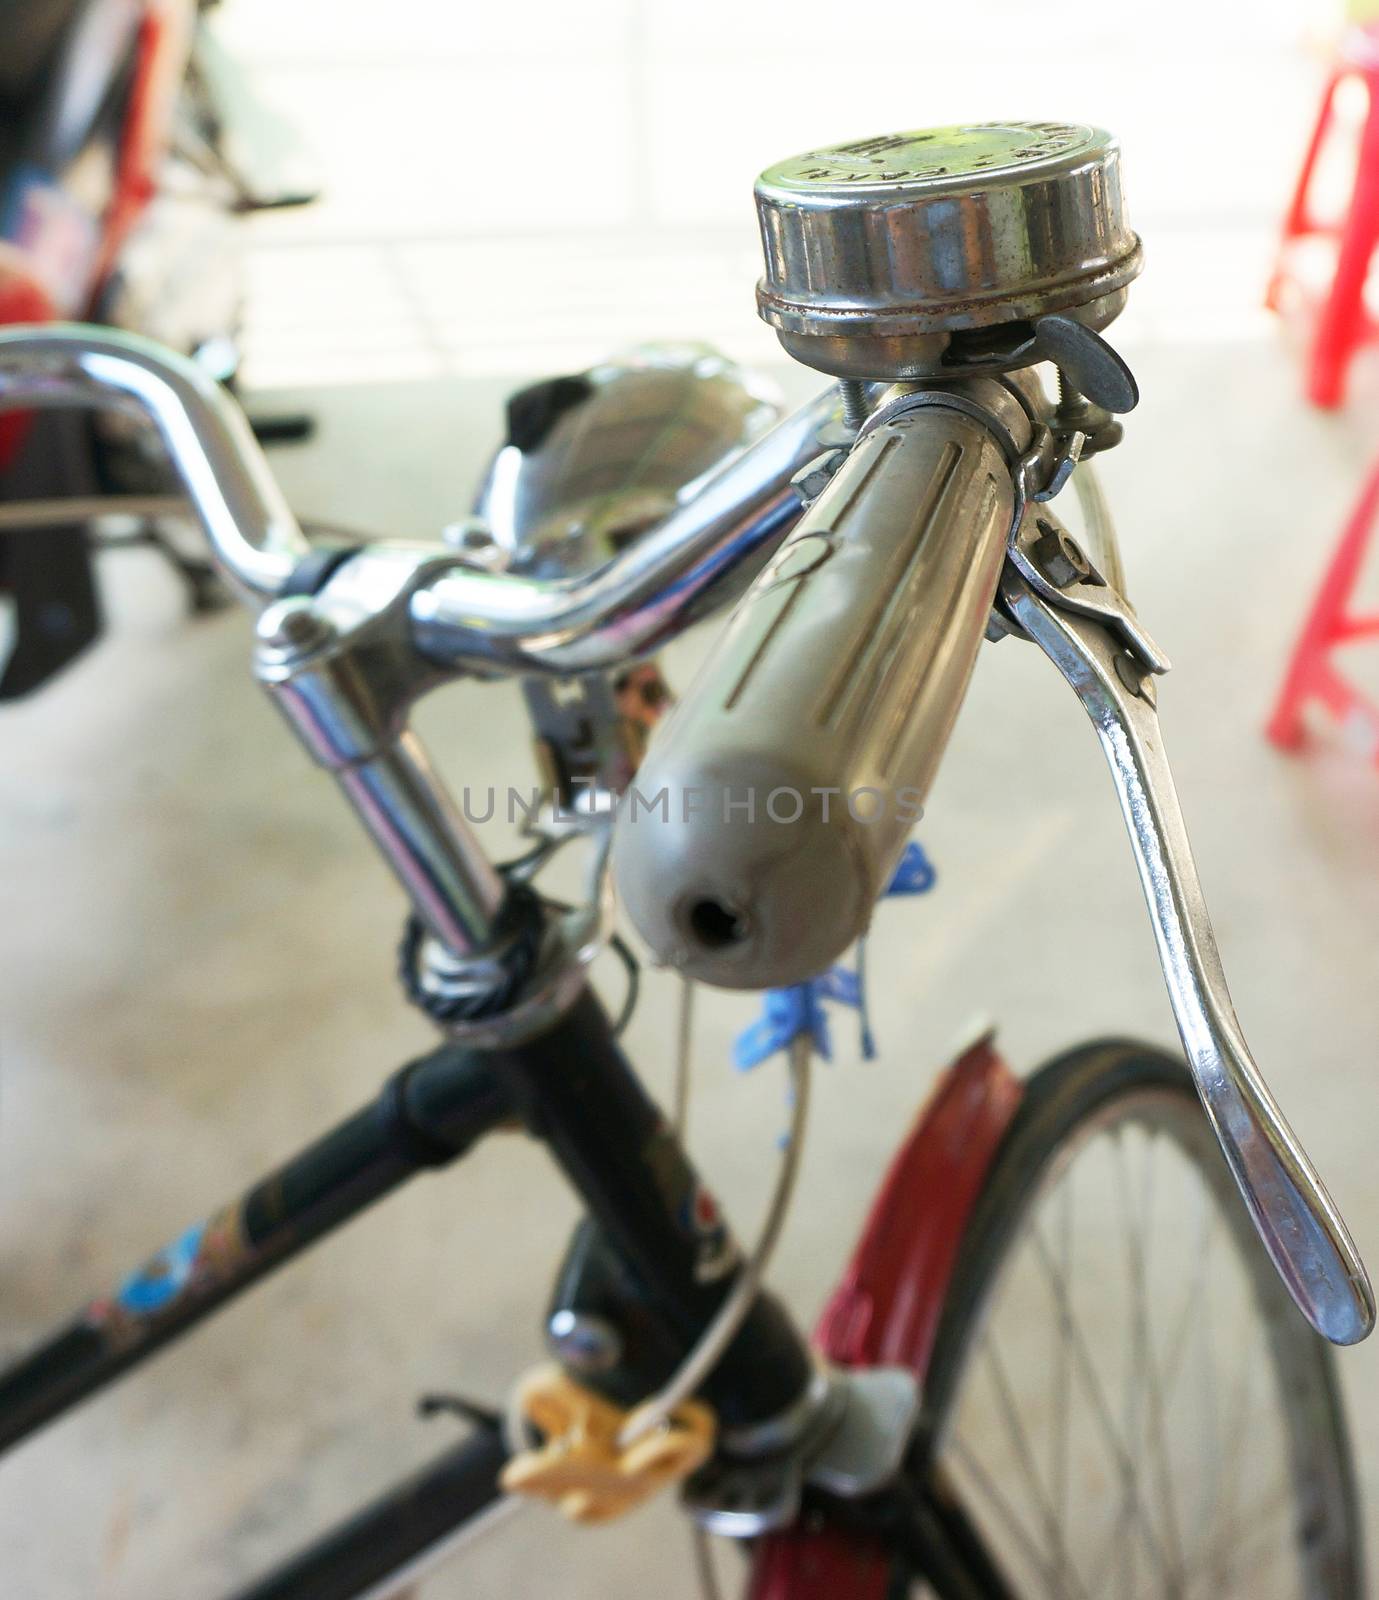 The older bikes, has a loud bell to prevent accidents.                               